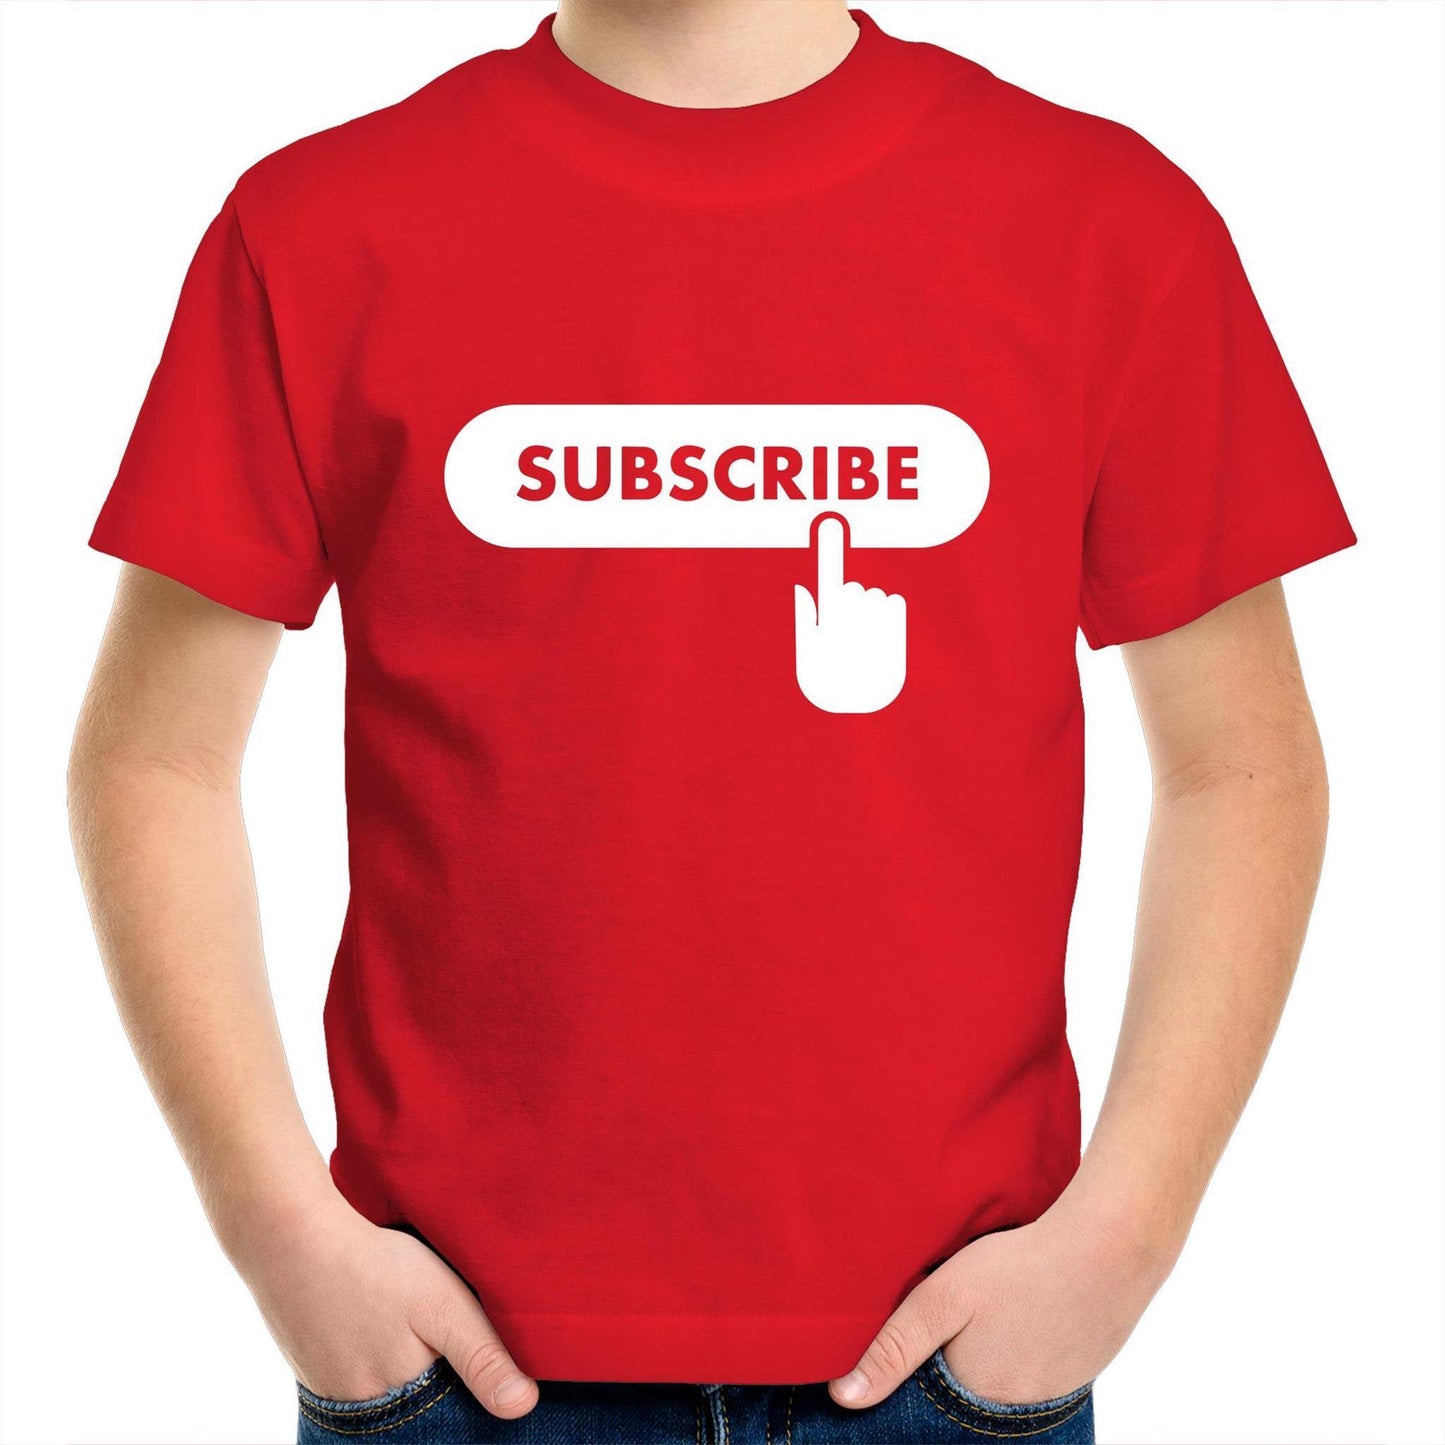 Subscribe - Kids Youth Crew T-Shirt Red Kids Youth T-shirt Funny